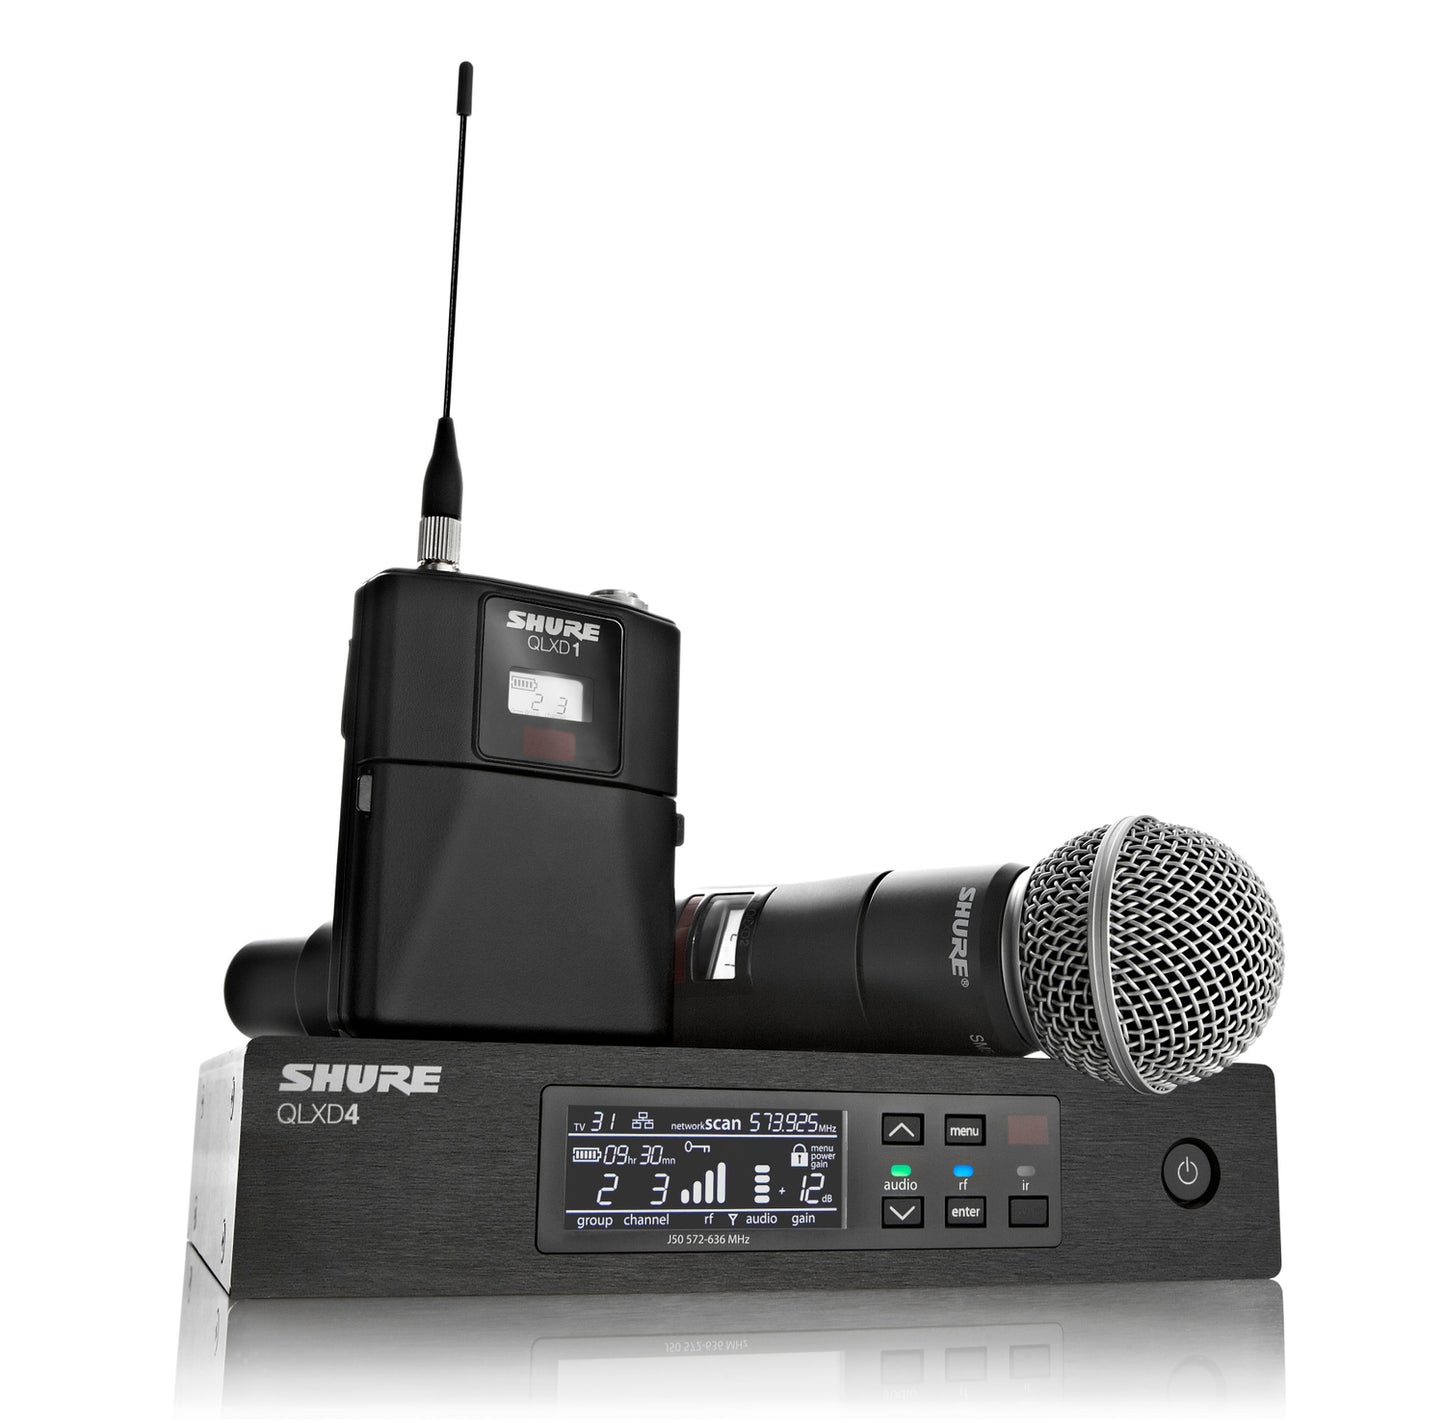 Hire - Shure QLXD4 Handheld or Lapel bodypack Microphone